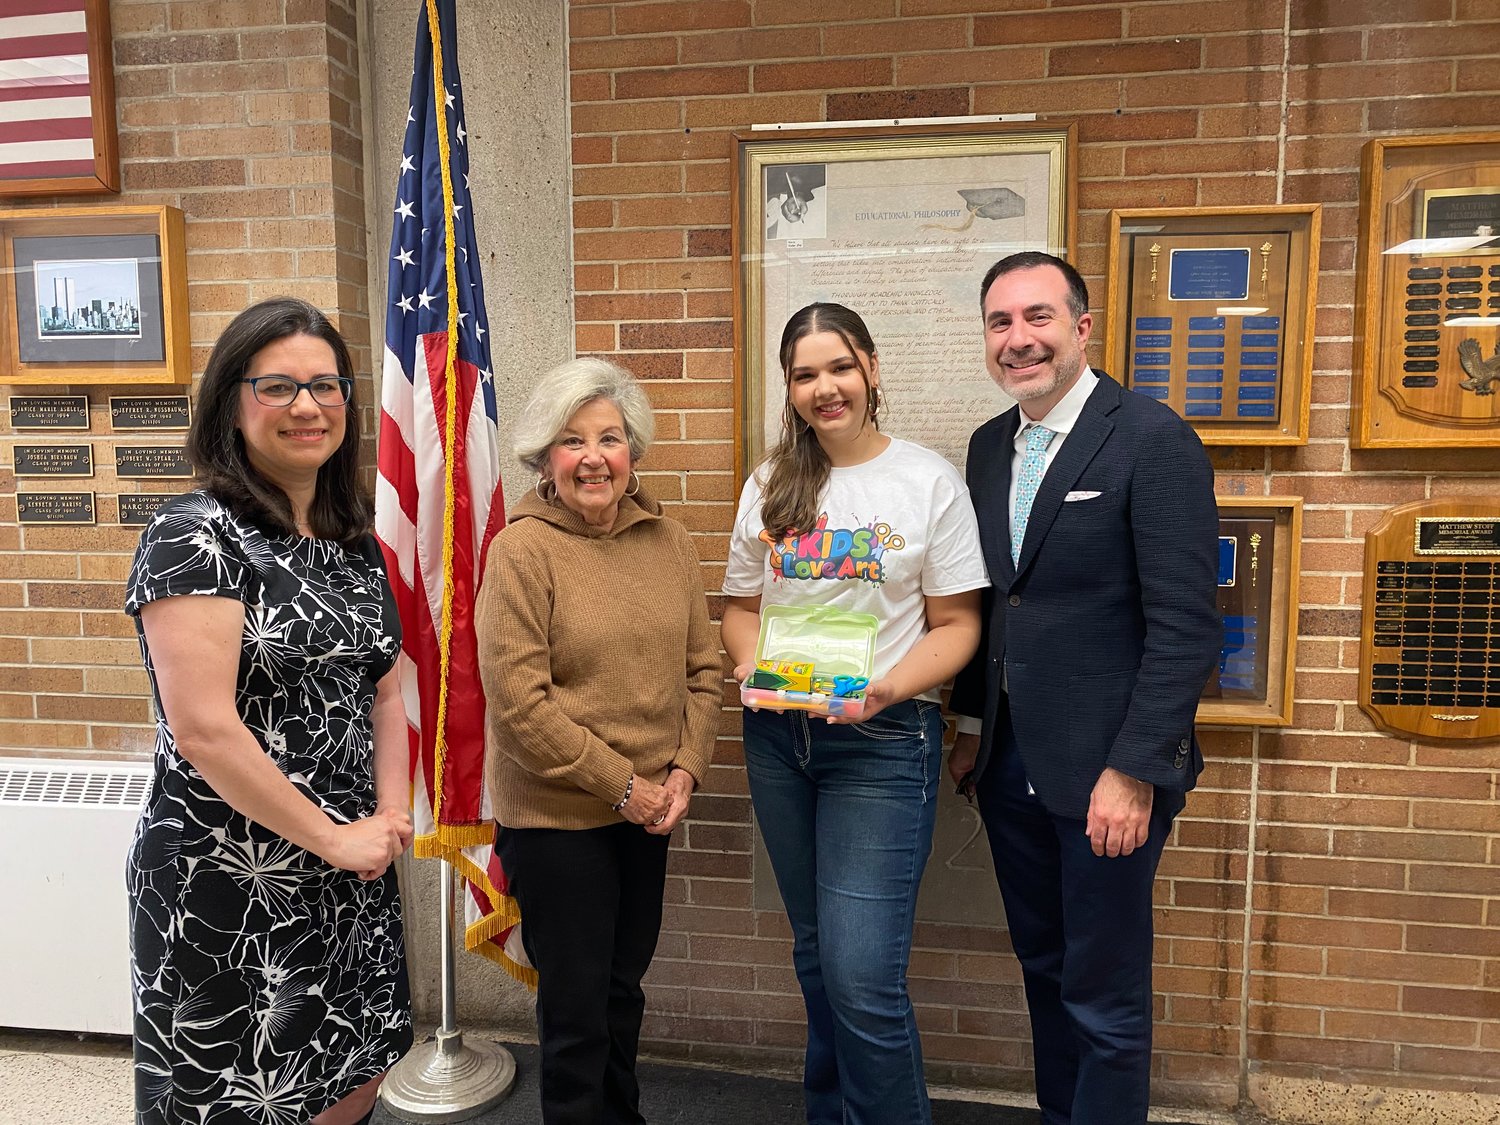 Hispanic Brotherhood’s Marguerite Keller, far left, and Marguerite Grasing received 75 boxes of art supplies from Oceanside High School junior Lauren Oliver on April 6 with Dr. David Rose, who connected Oliver with the organization.